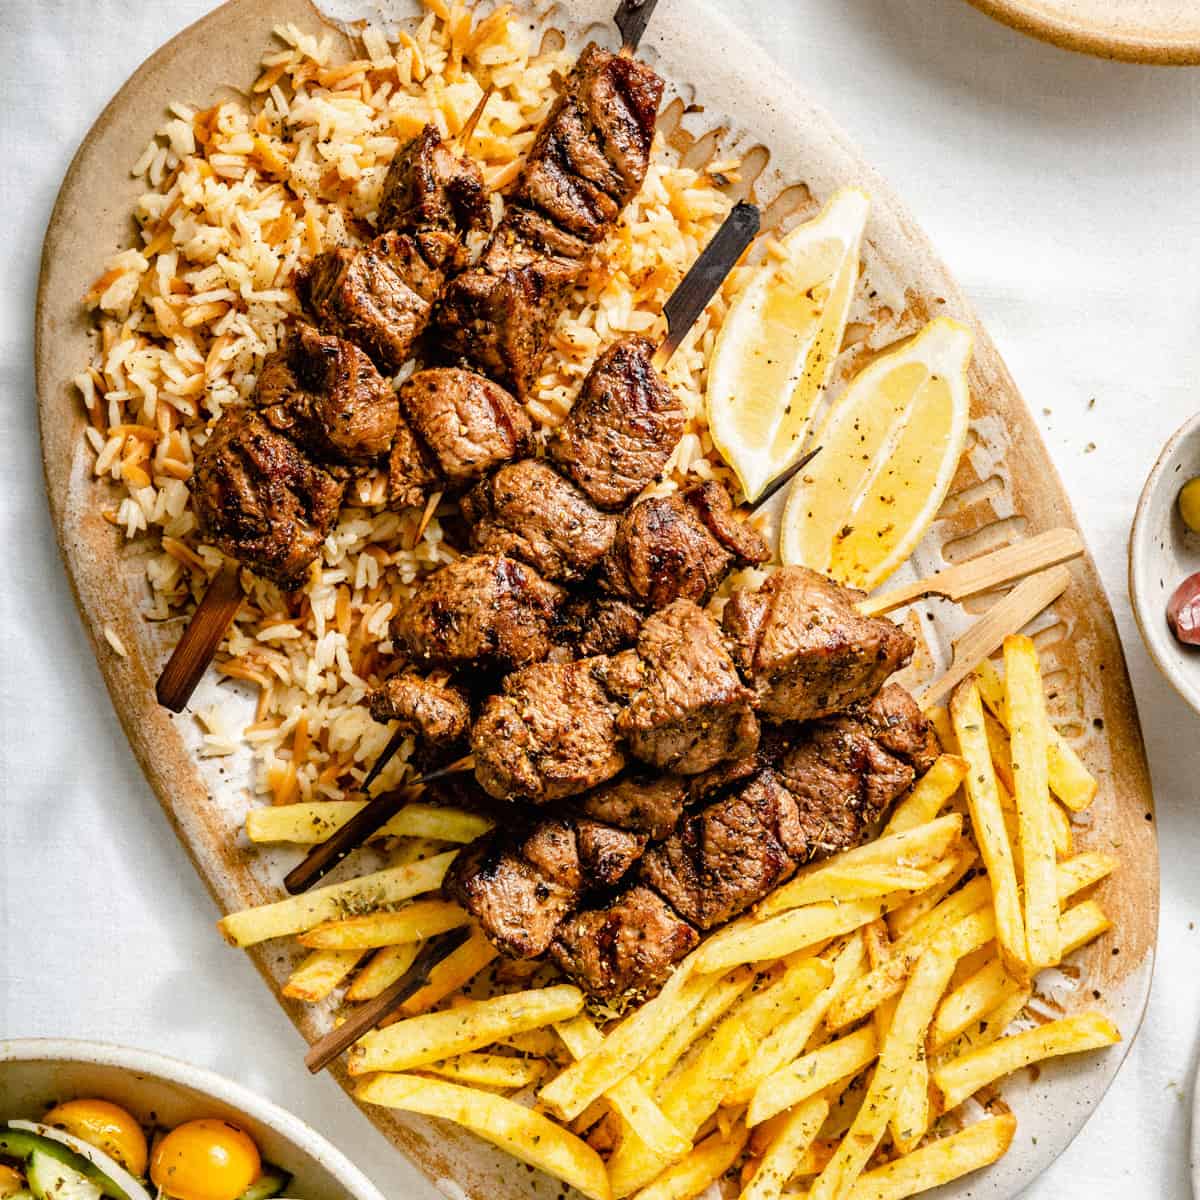 A platter with chargrilled Greek lamb souvlaki, orzo rice, fries and lemon wedges.